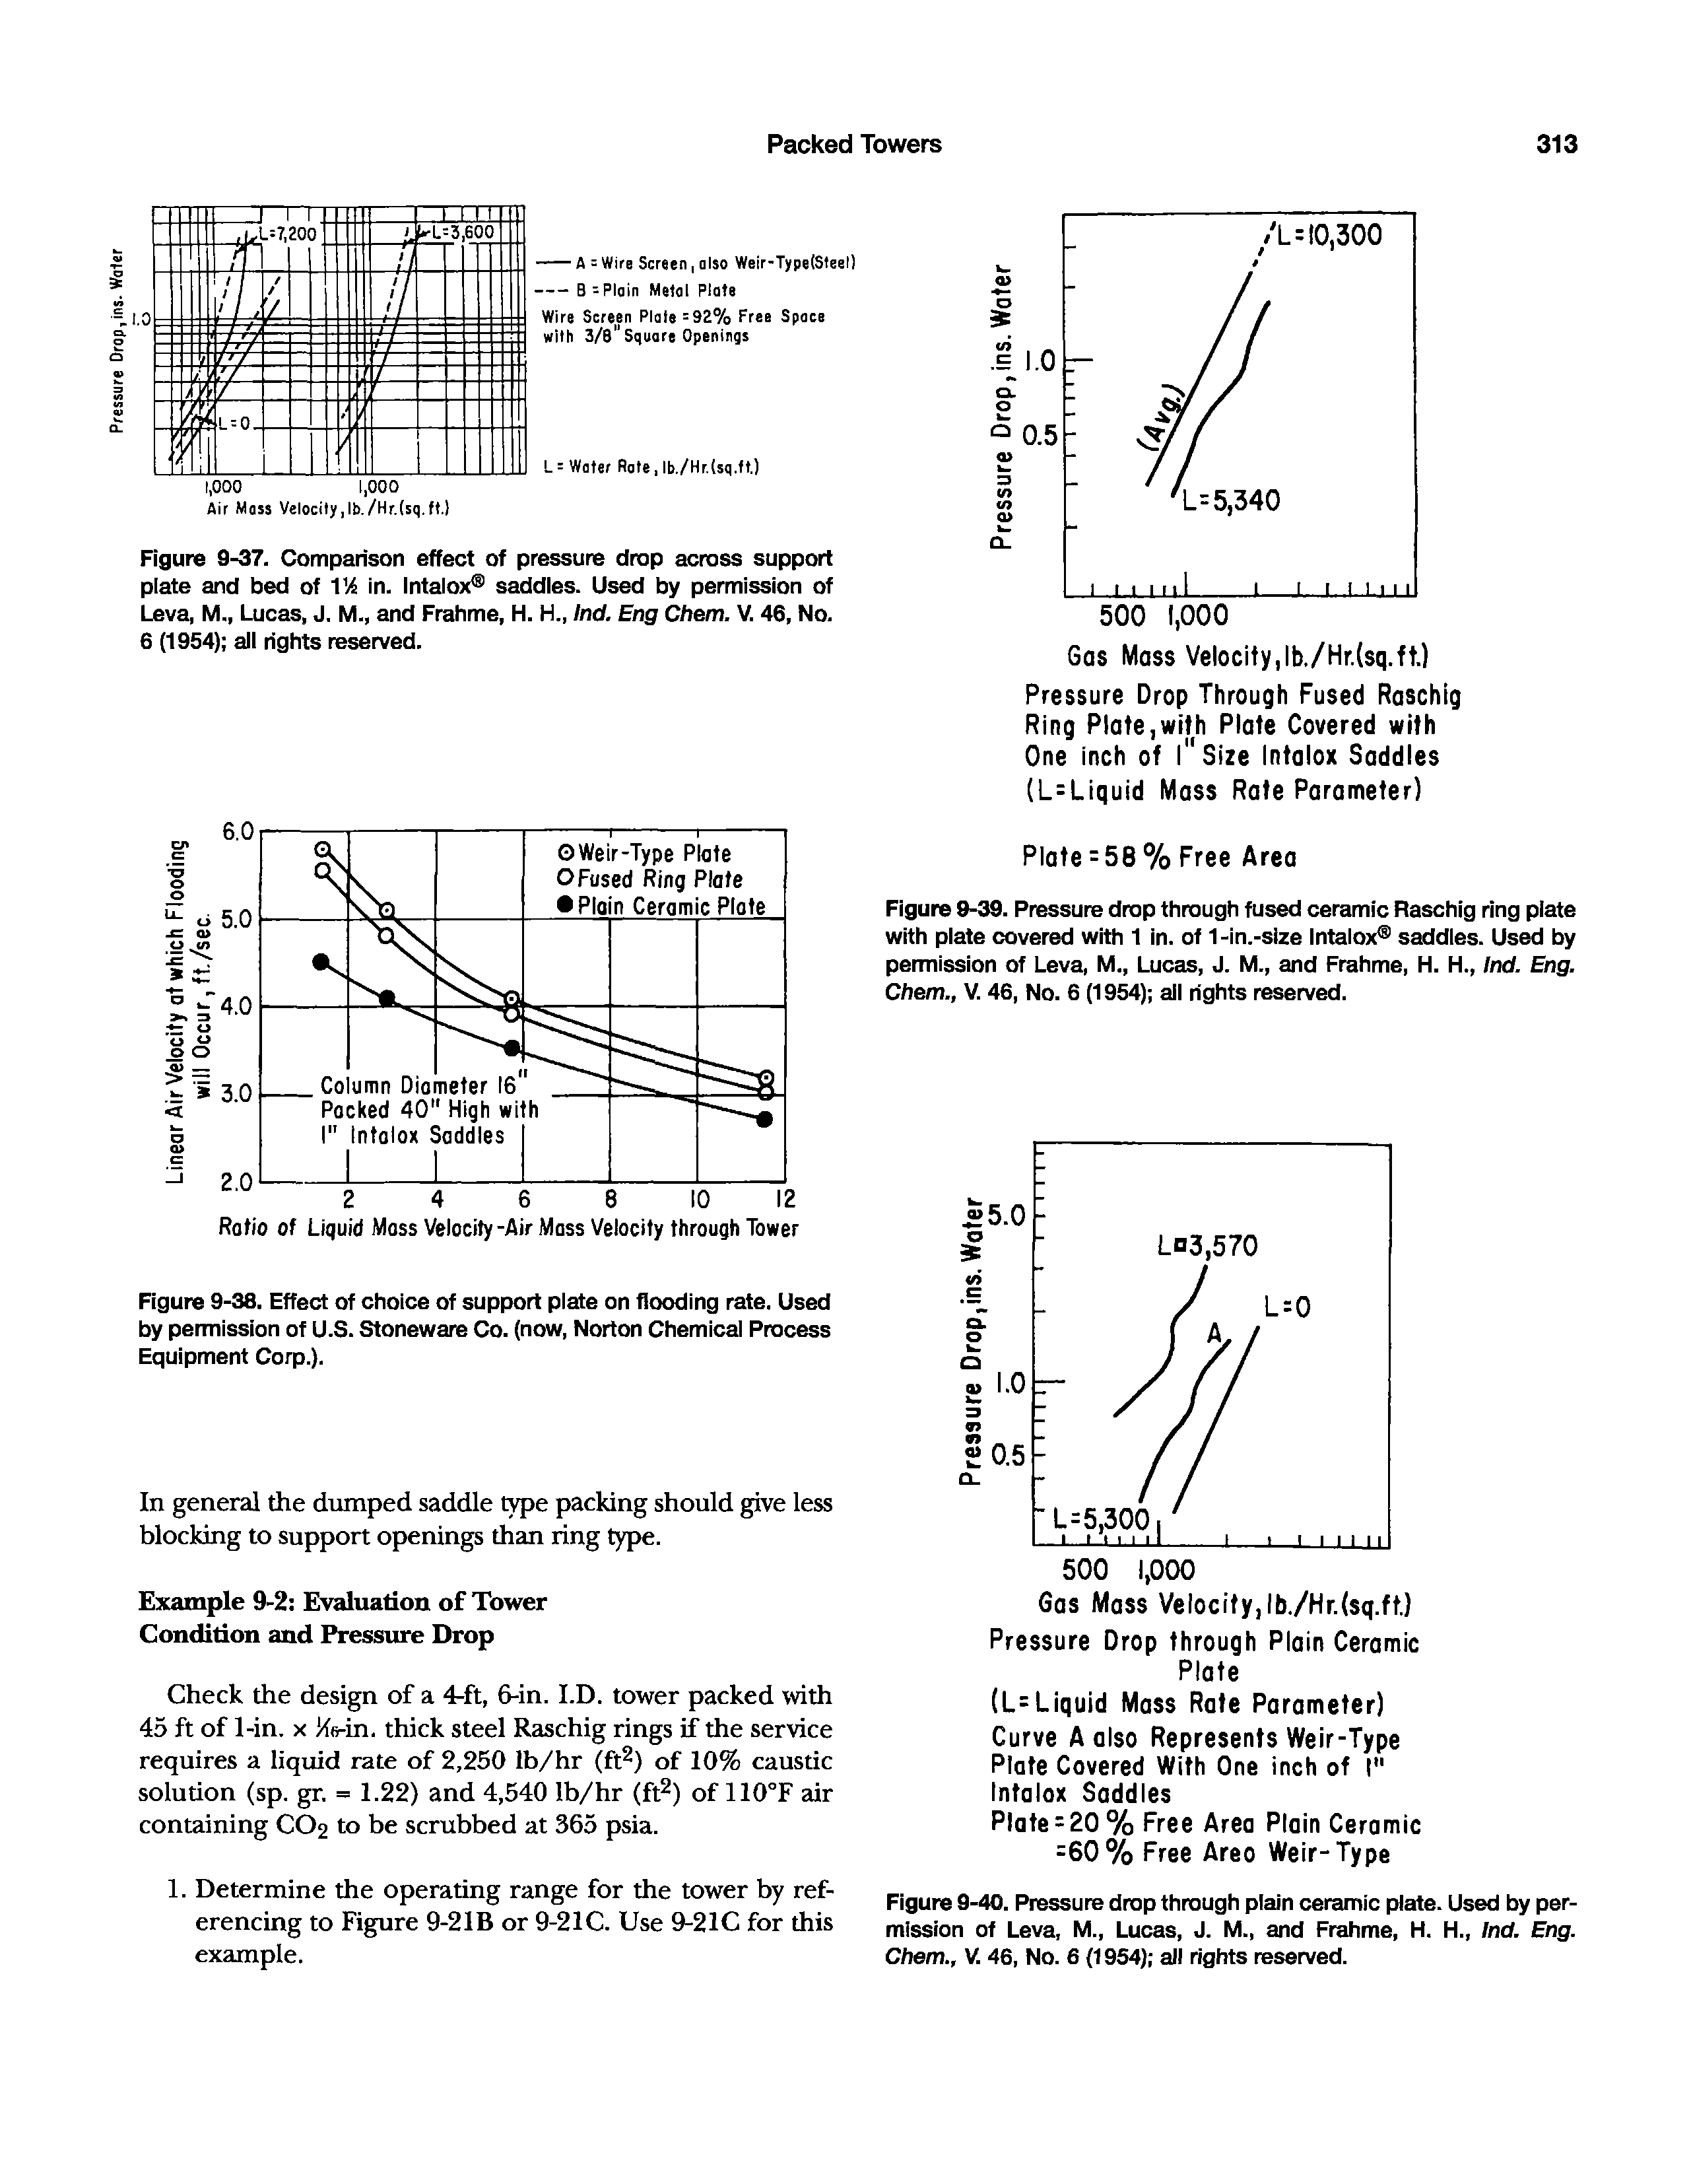 Figure 9-37. Comparison effect of pressure drop across support plate and bed of VA in. Intalox saddles. Used by permission of Leva, M., Lucas, J. M., and Frahme, H. H., Ind, Eng Chem. V. 46, No. 6 (1954) all rights reserved.